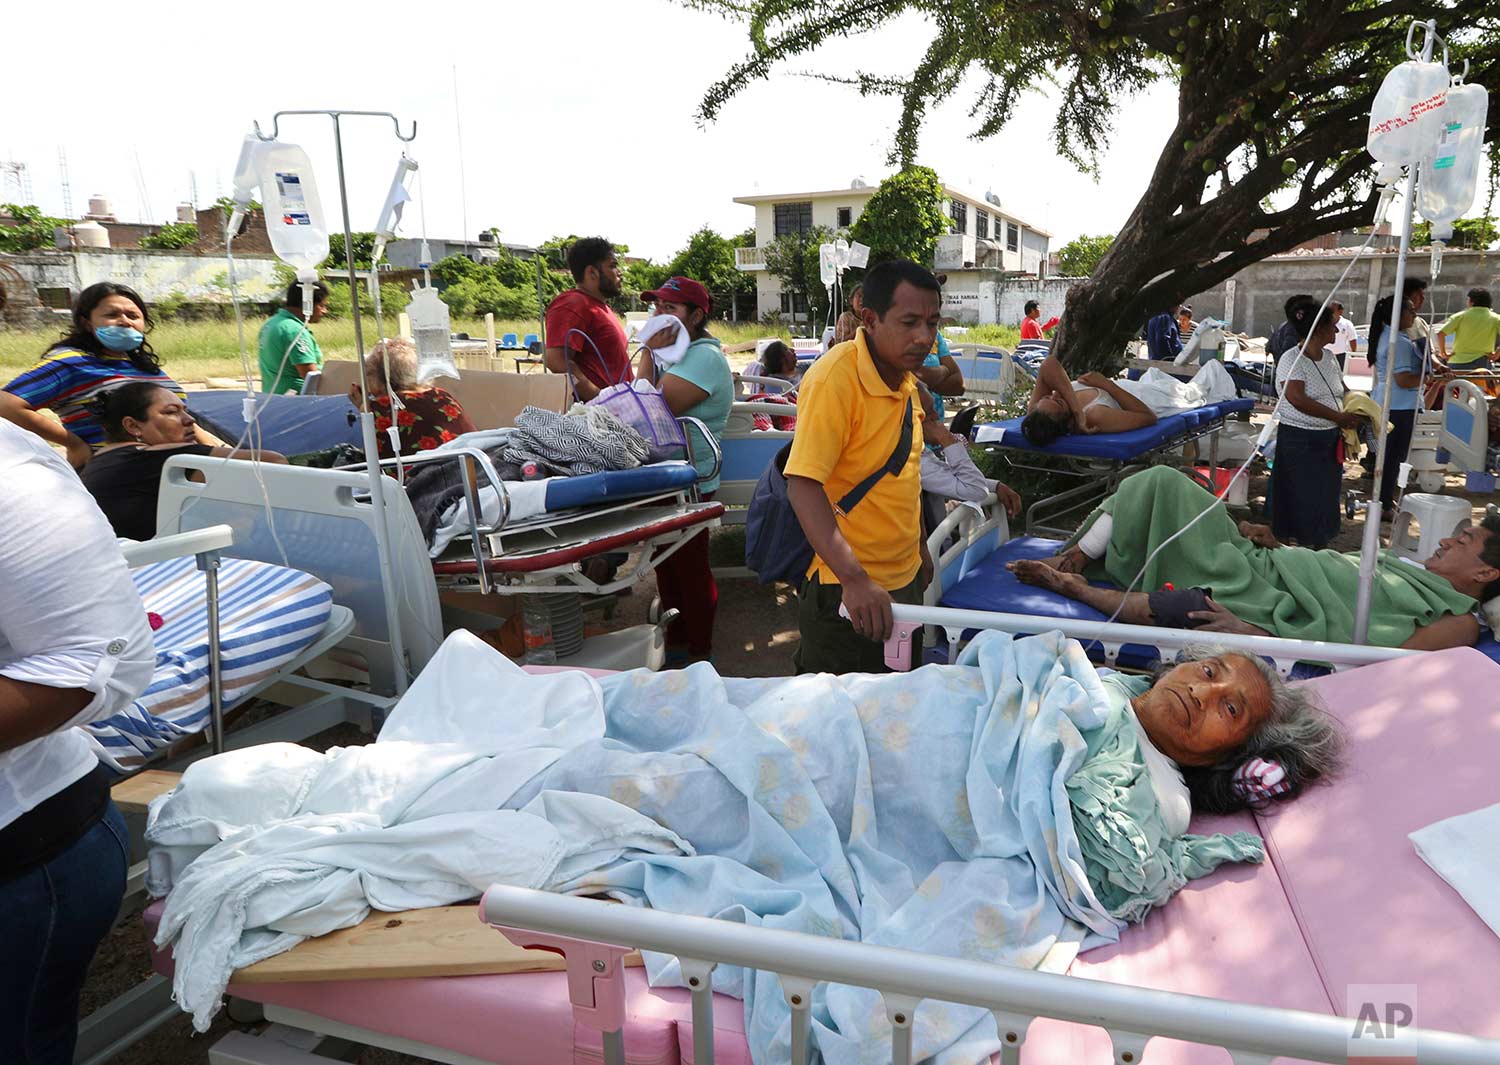  Evacuated patients lie on their hospital beds shaded by a tree, in the aftermath of a massive earthquake in Juchitan, Oaxaca state, Mexico, Friday, Sept. 8, 2017. One of the most powerful earthquakes ever to strike Mexico hit off its southern Pacifi